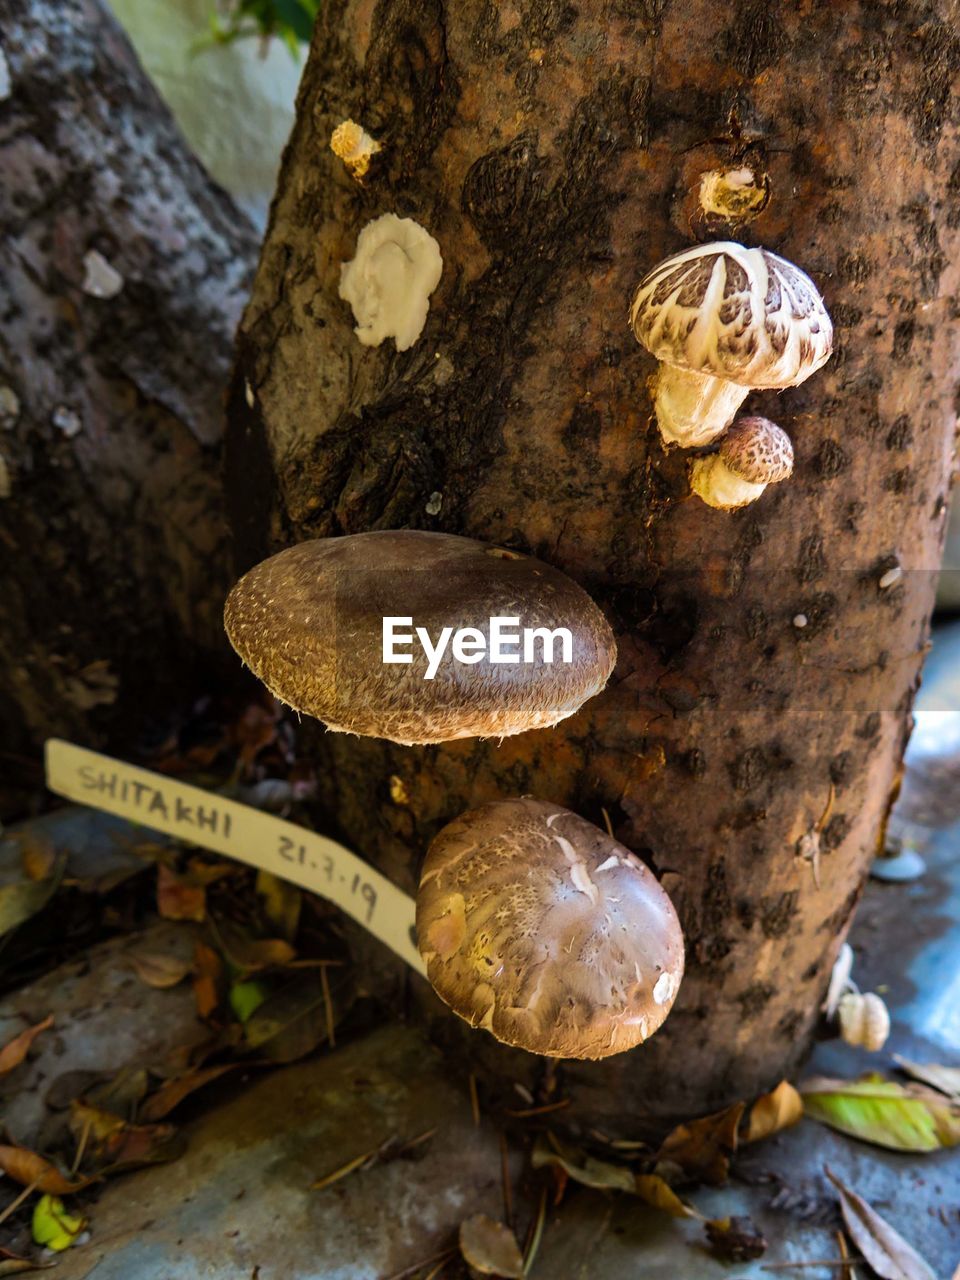 CLOSE-UP OF A MUSHROOMS ON TREE TRUNK